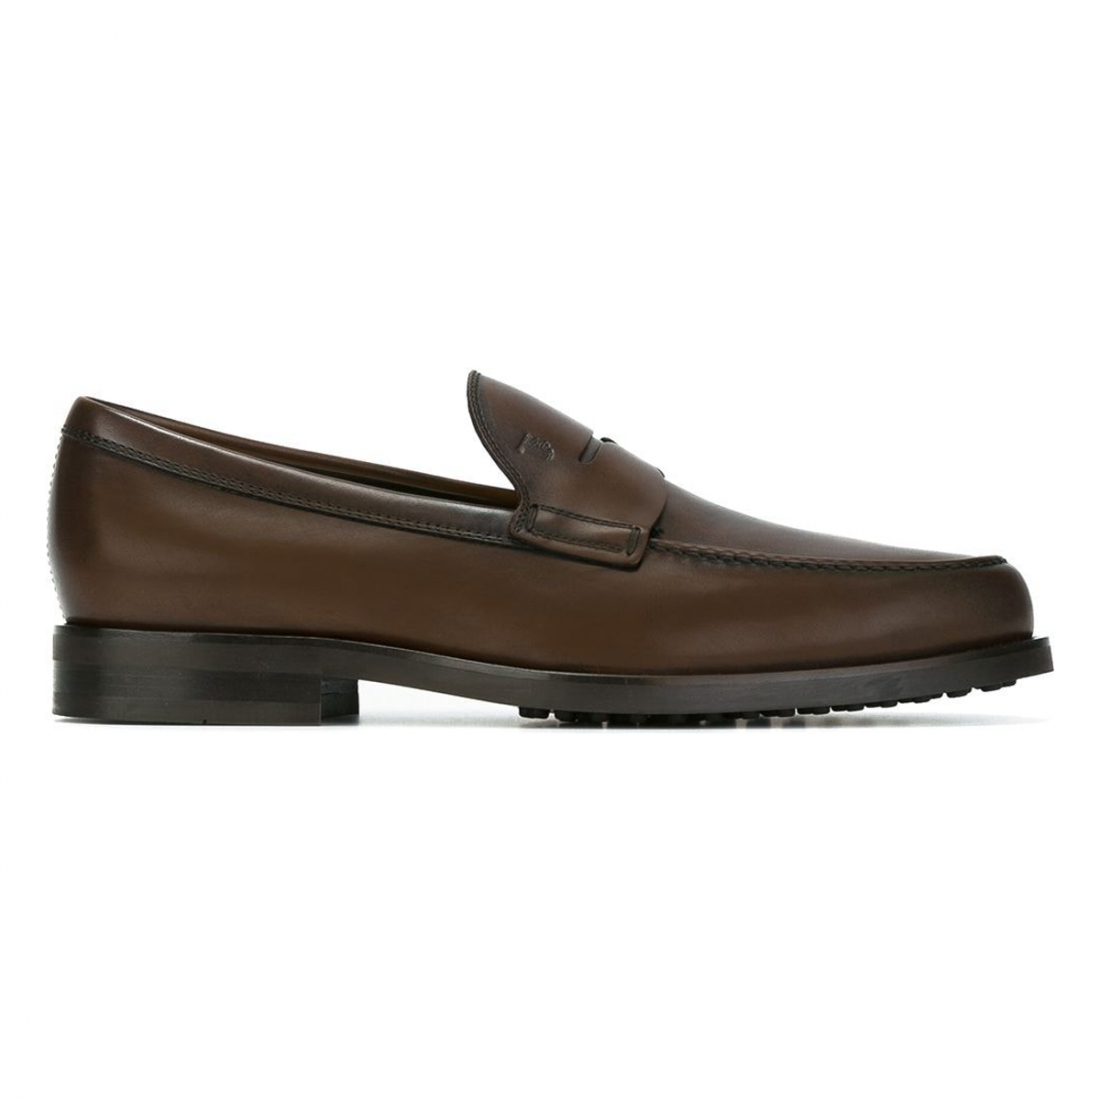 Men's 'Classic' Loafers